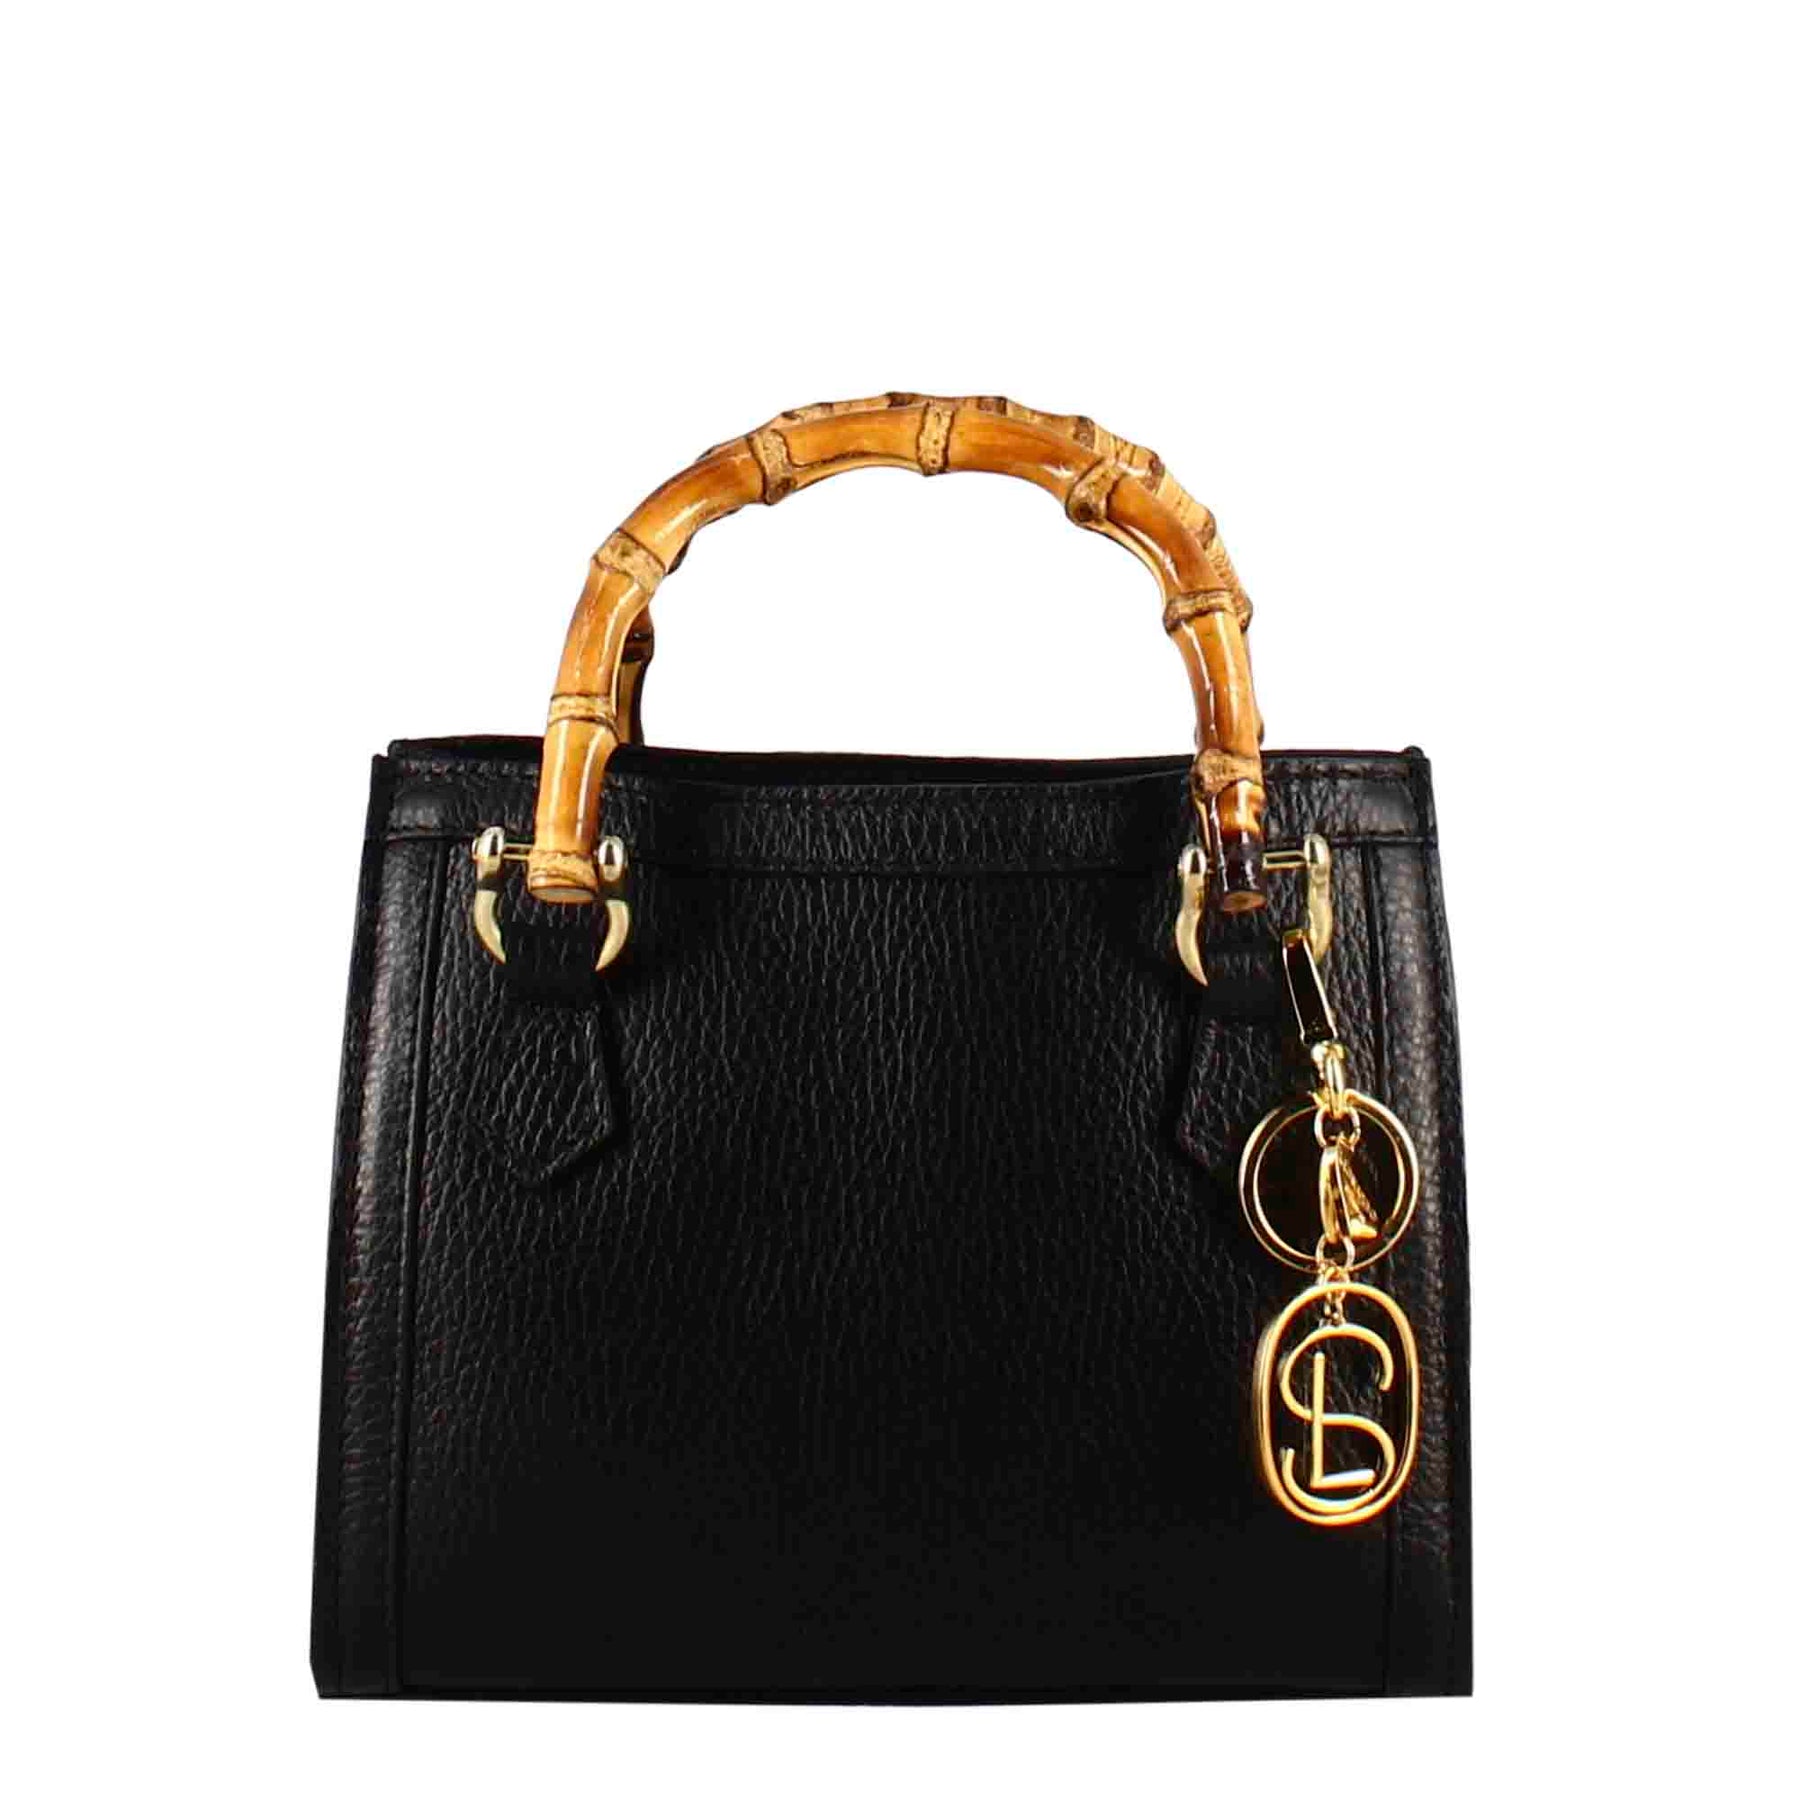 Black leather mini Bamboo handbag for women with wooden handles and shoulder strap